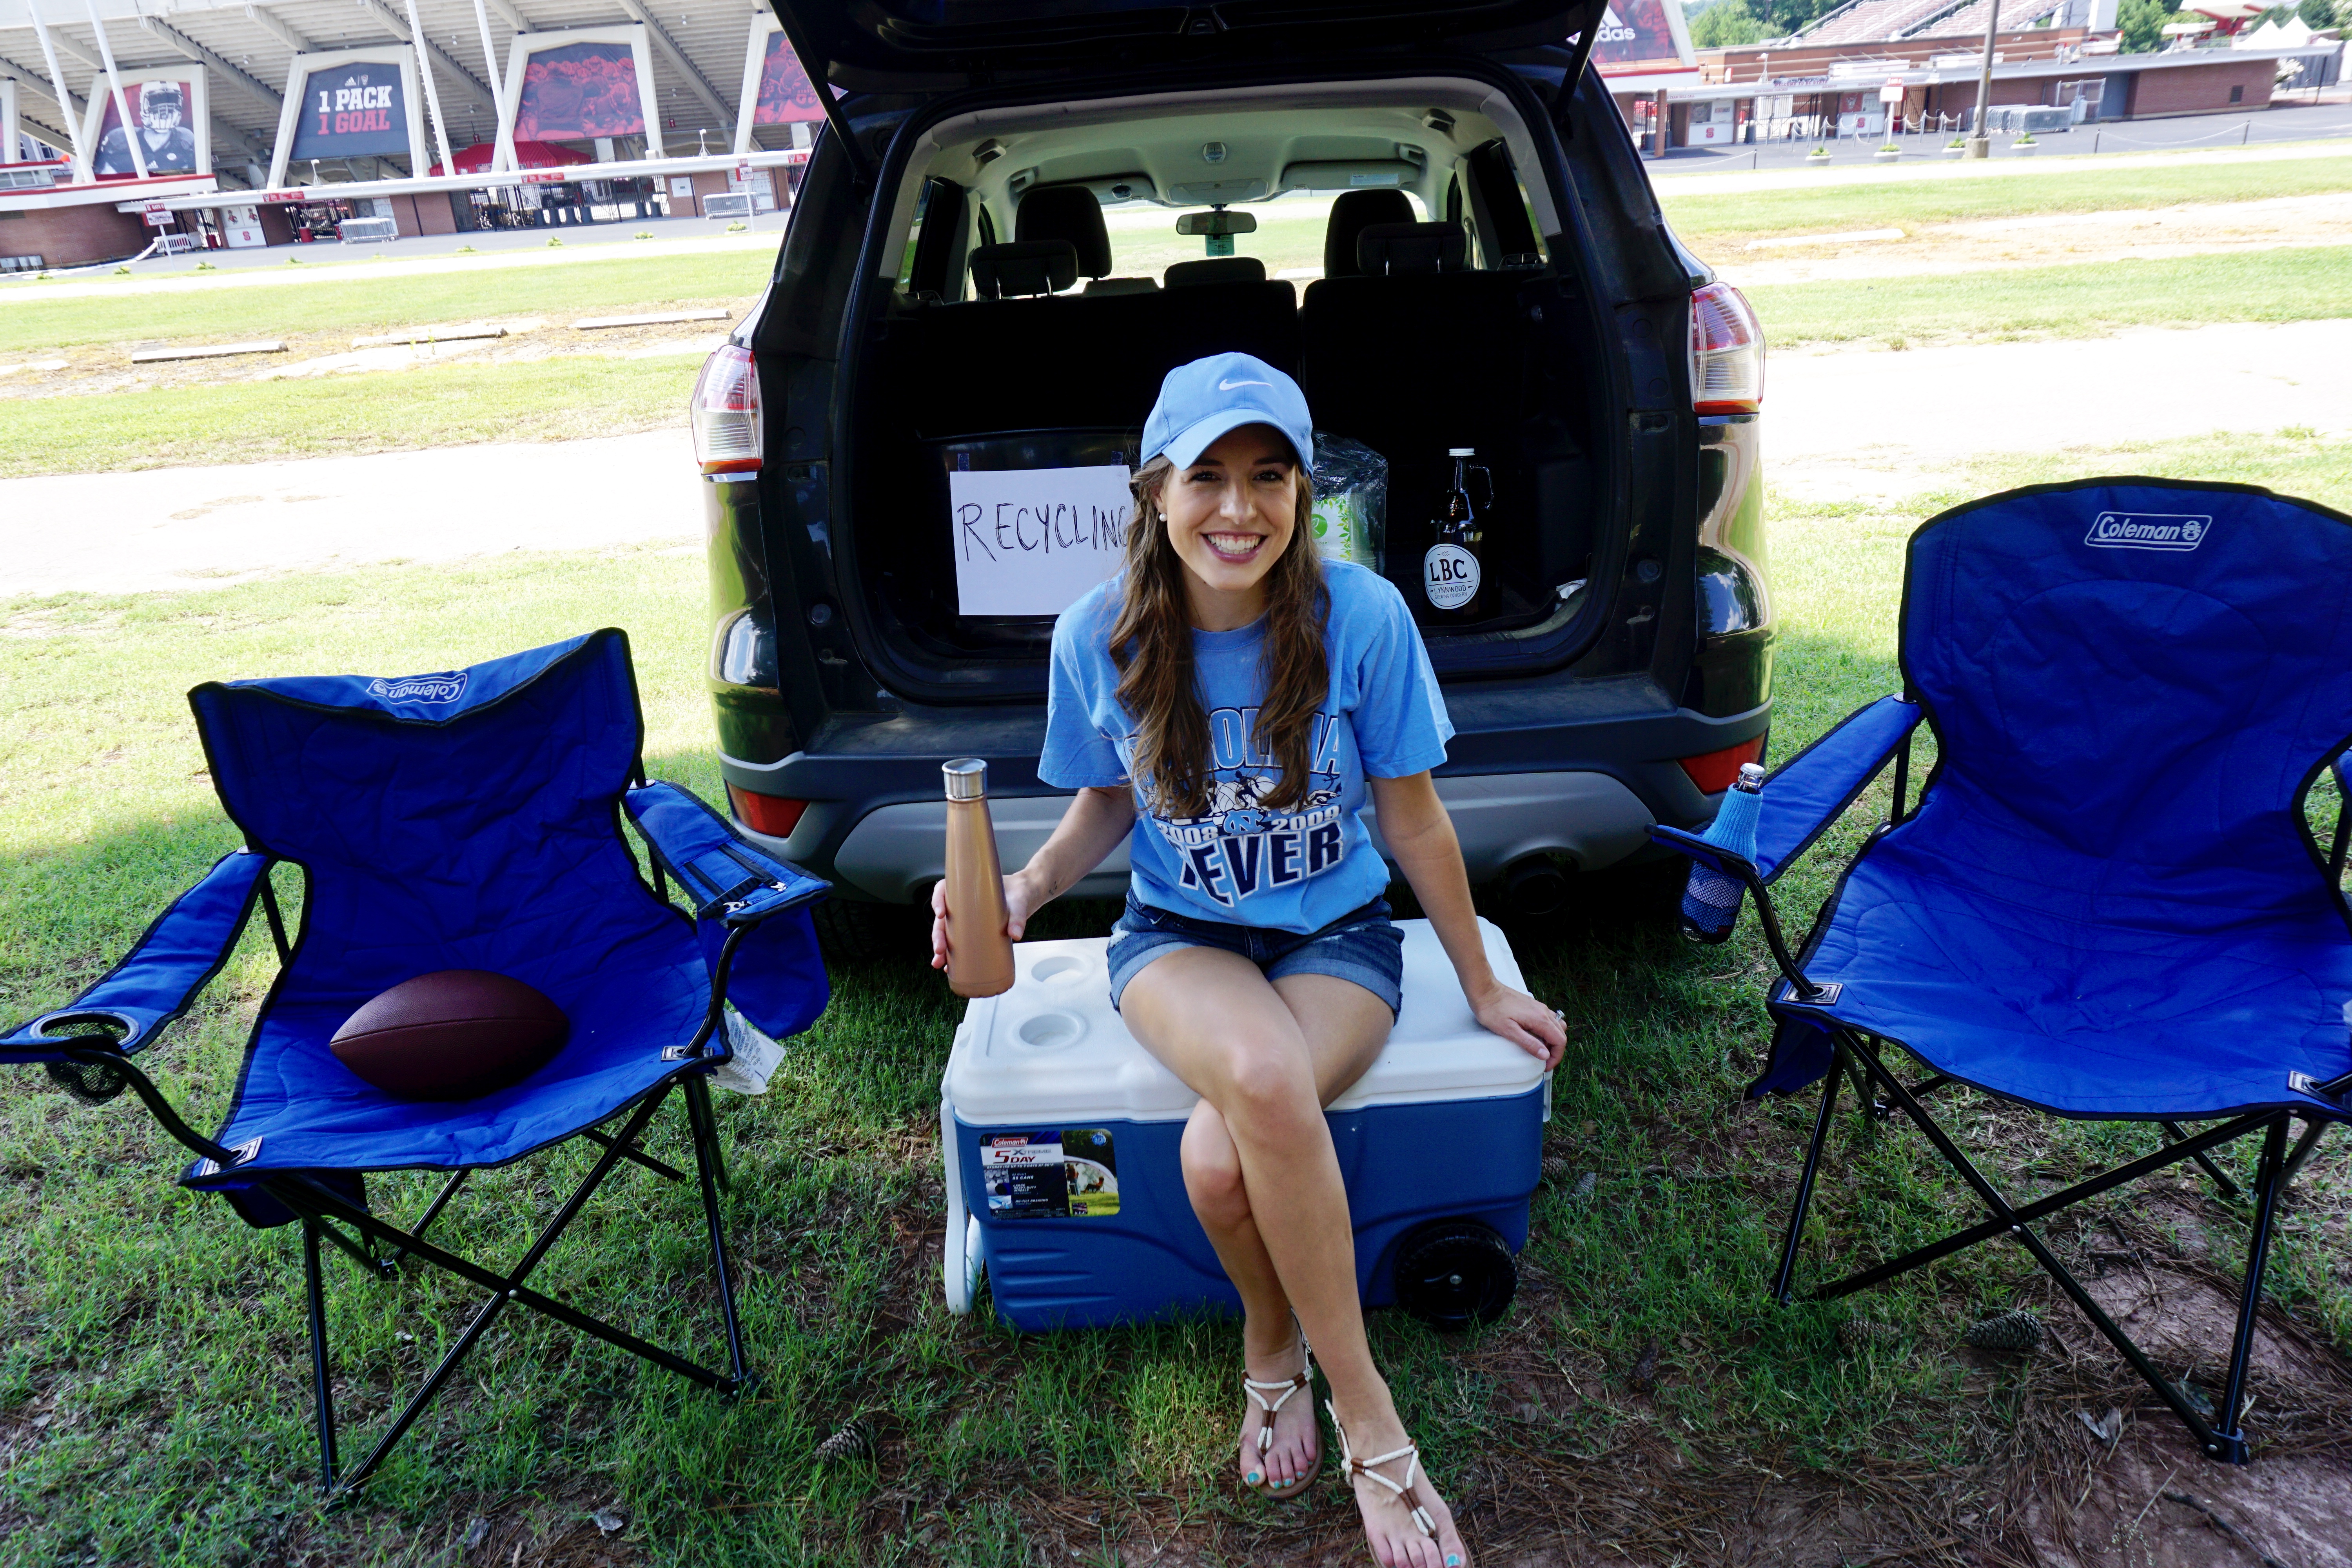 How to Have an Eco-Friendly Tailgate